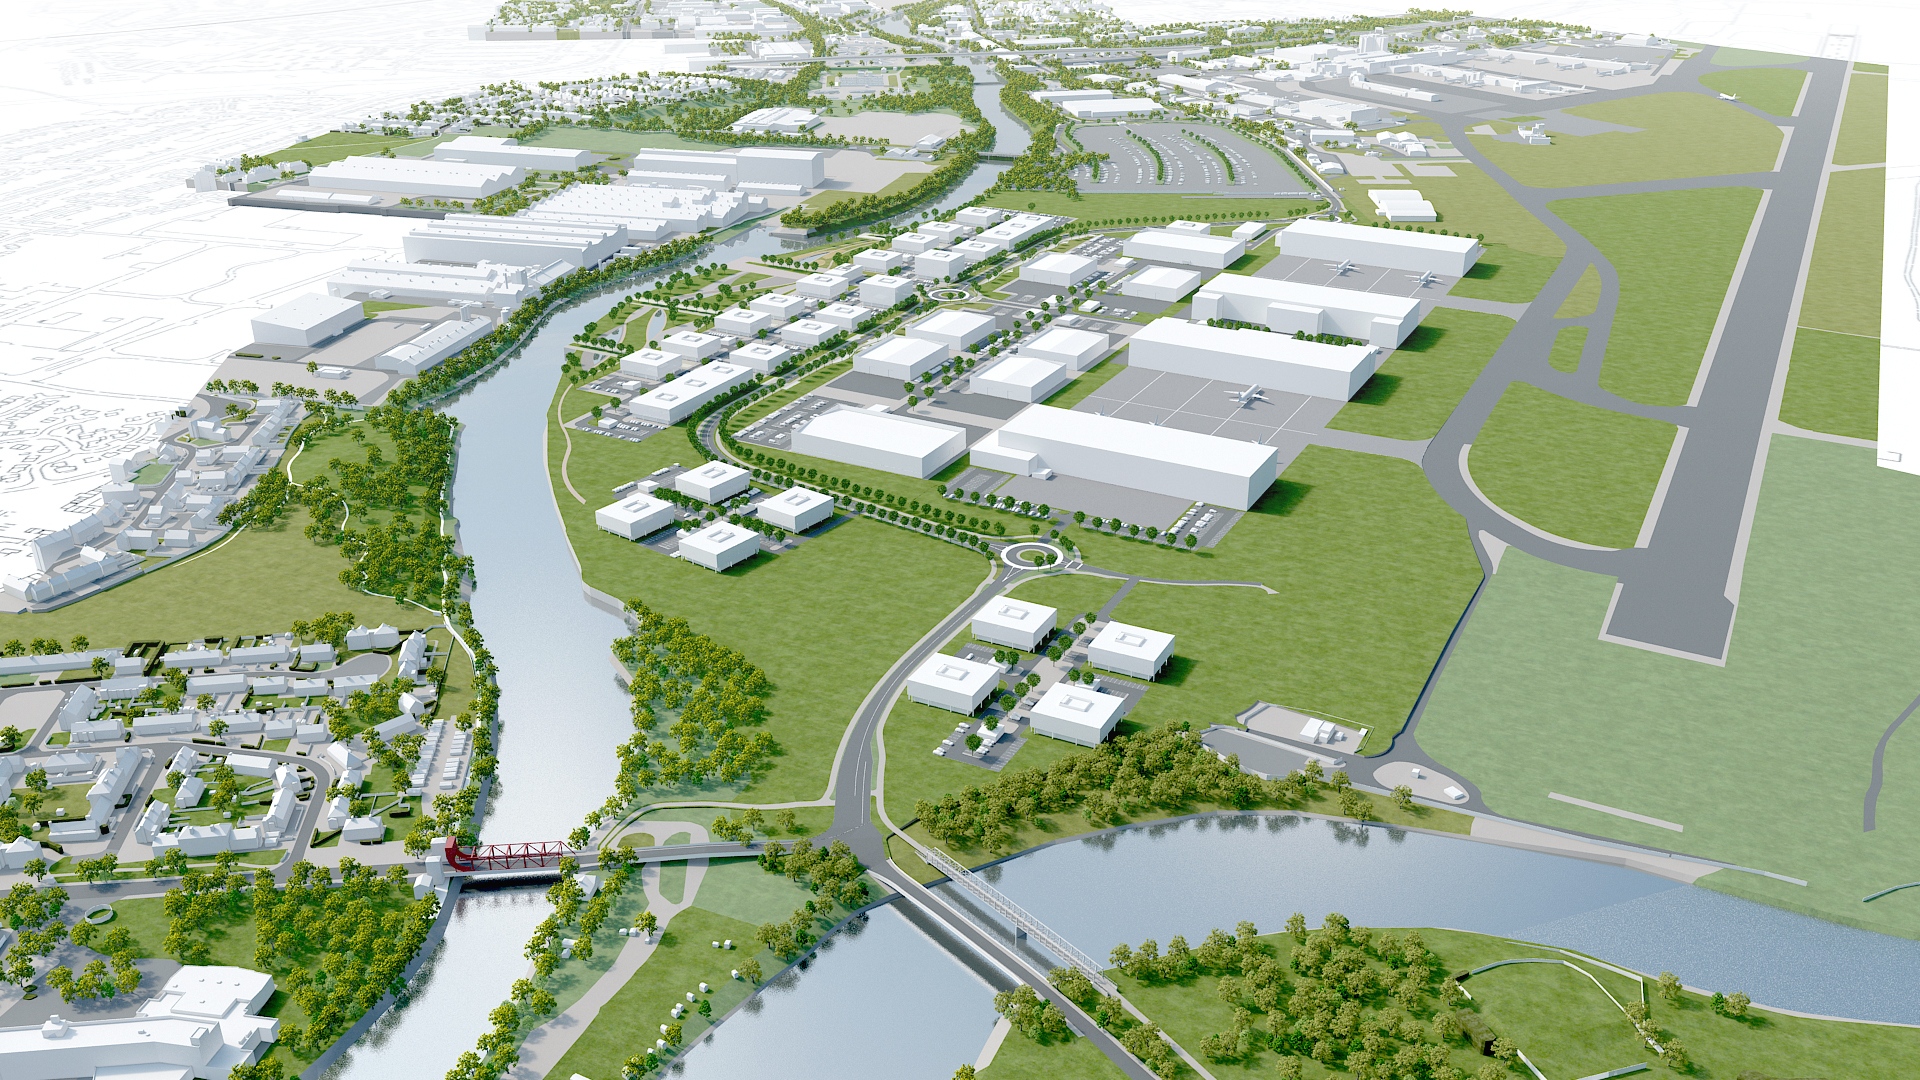 Artist impression aerial view of the Advanced Manufacturing Innovation District Scotland. Credit: Renfrewshire Council